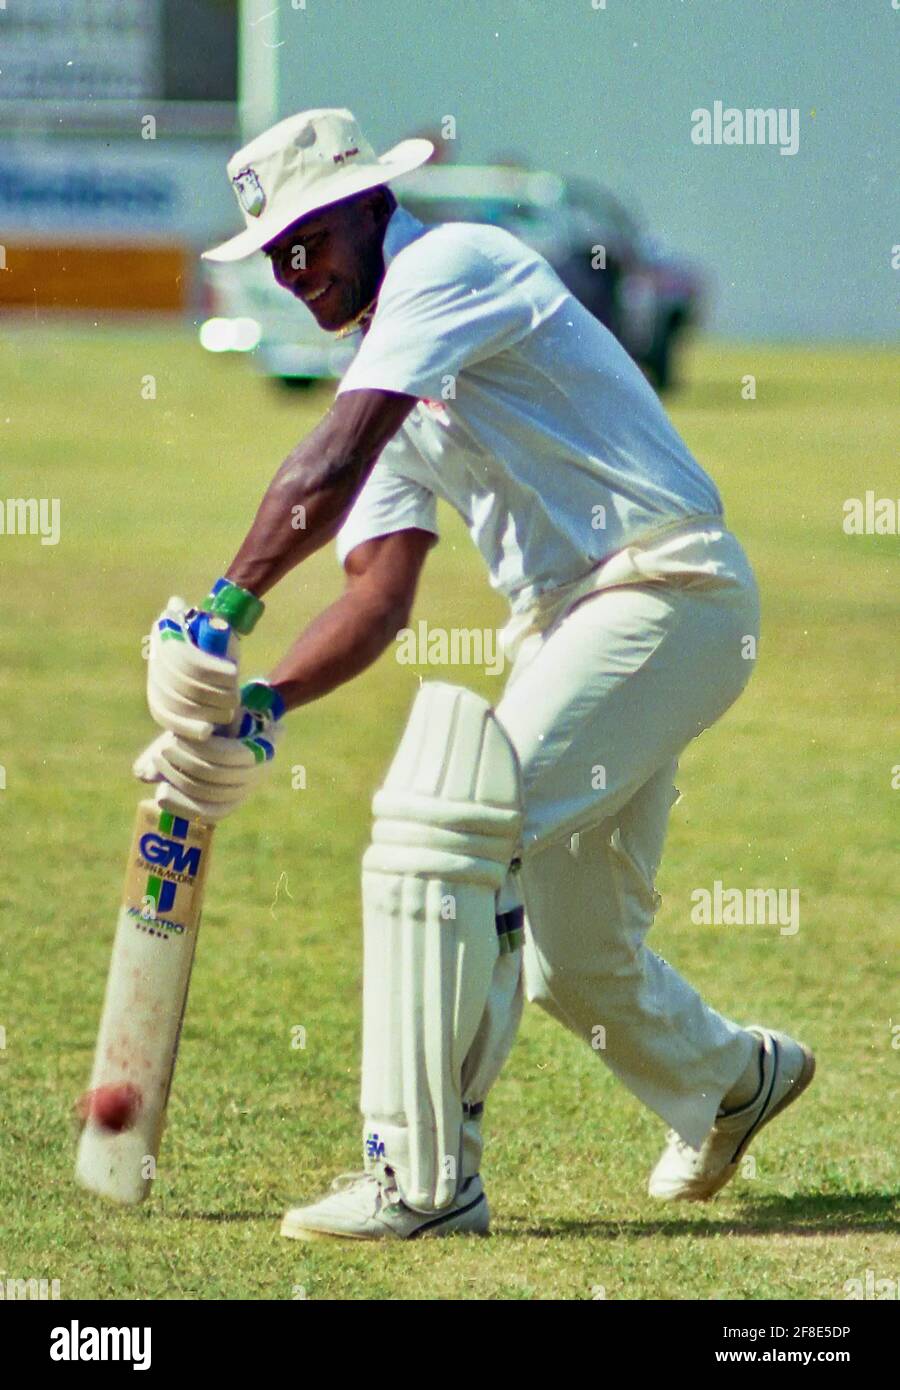 West Indiies batsman practices before the fifth test match vs. Australia at the Antigua Recreation Ground, in St. John’s, Antigua 27 April–1 May 1991 Stock Photo